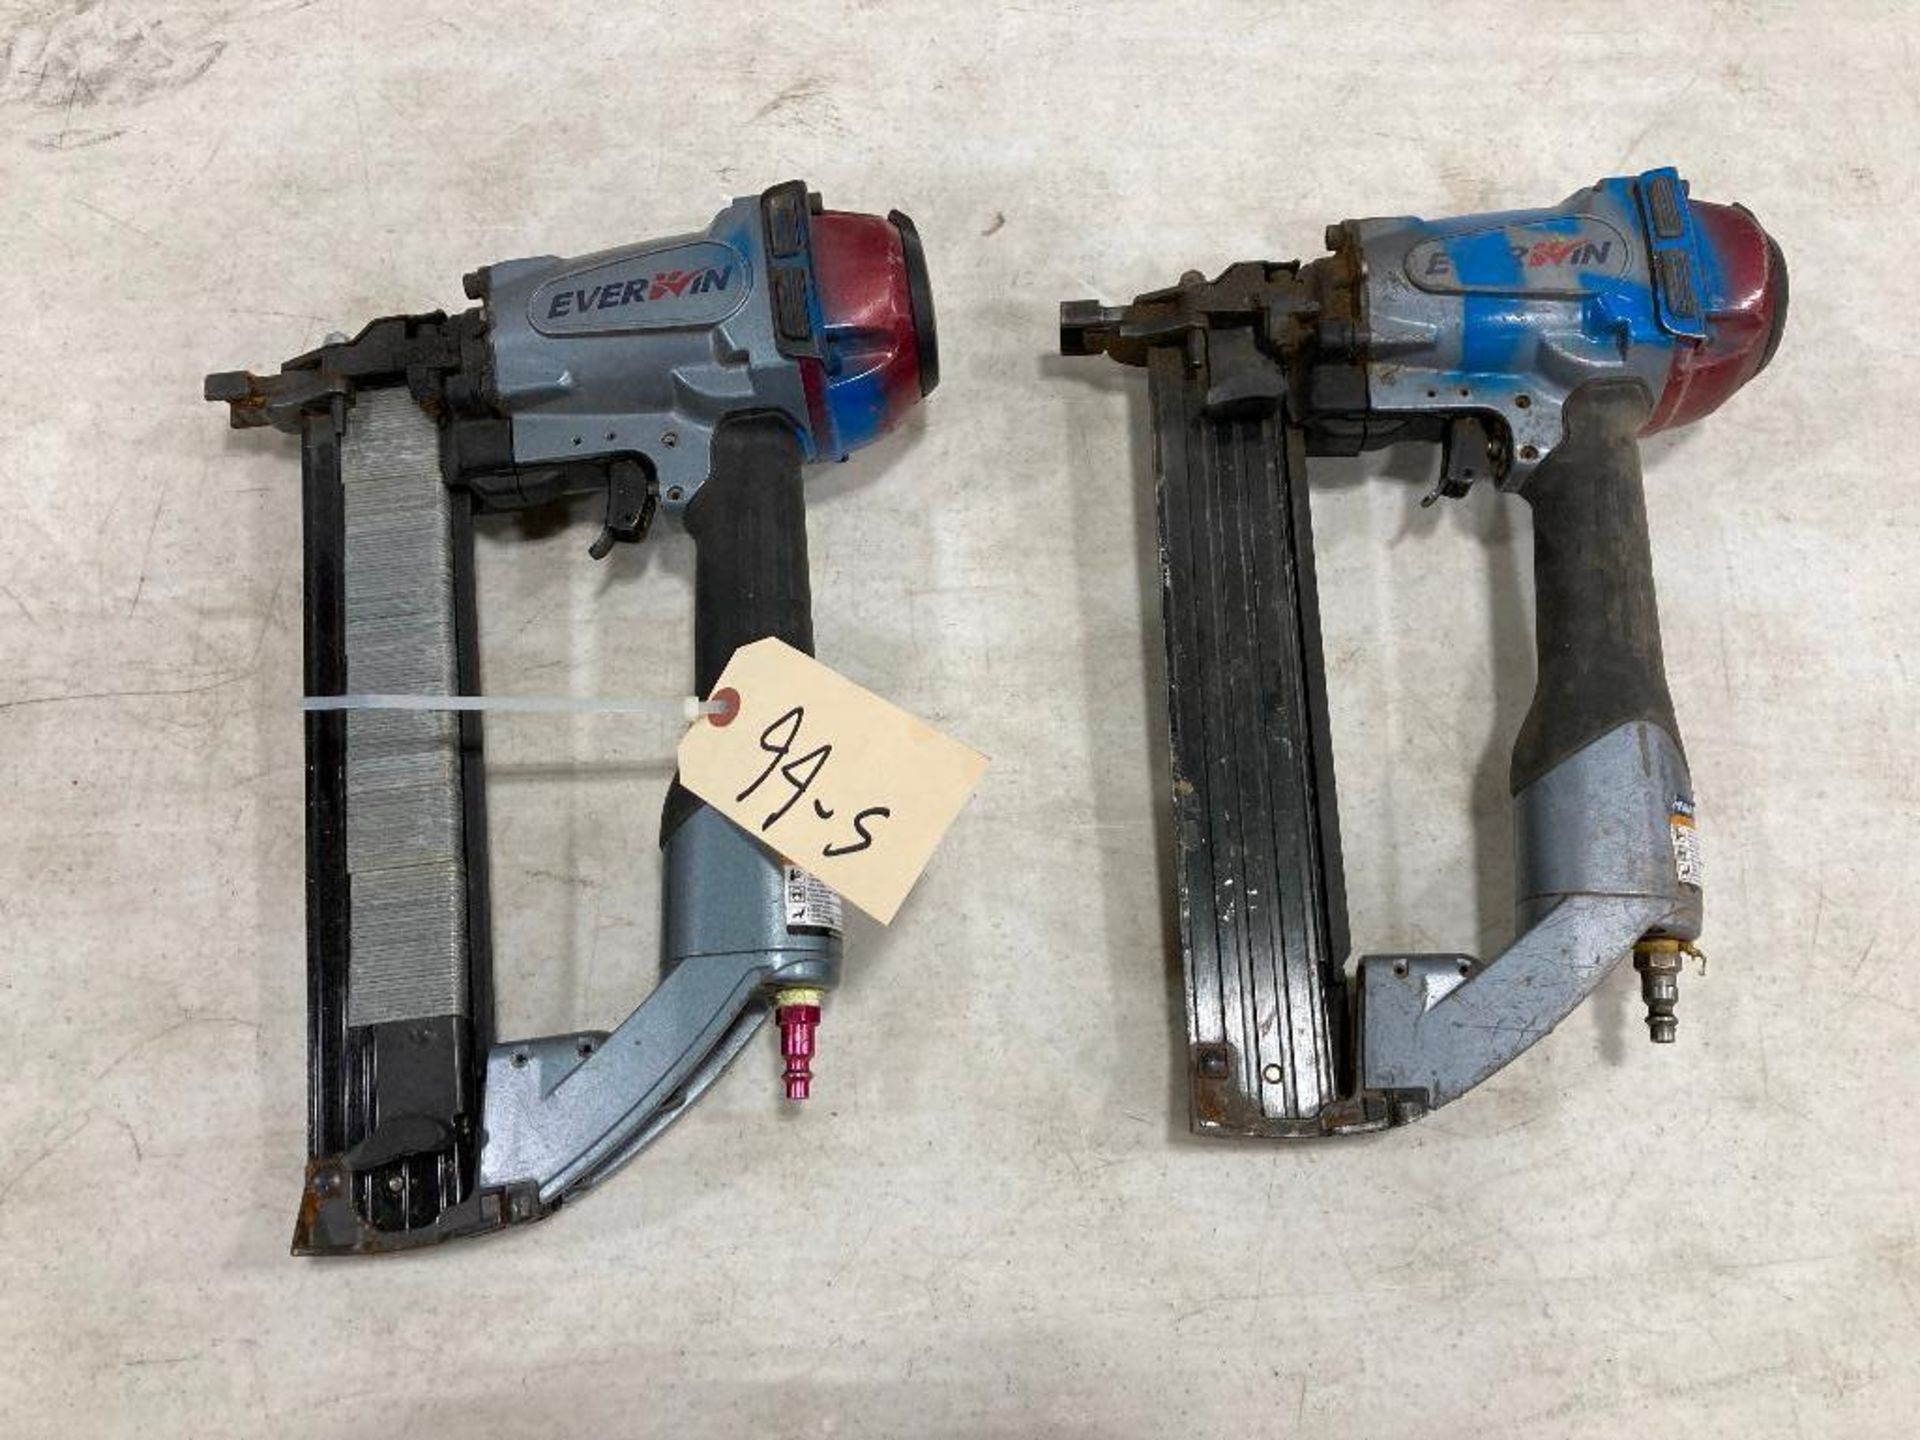 Lot of (2) Everwin SN50S4 Pneumatic Staplers